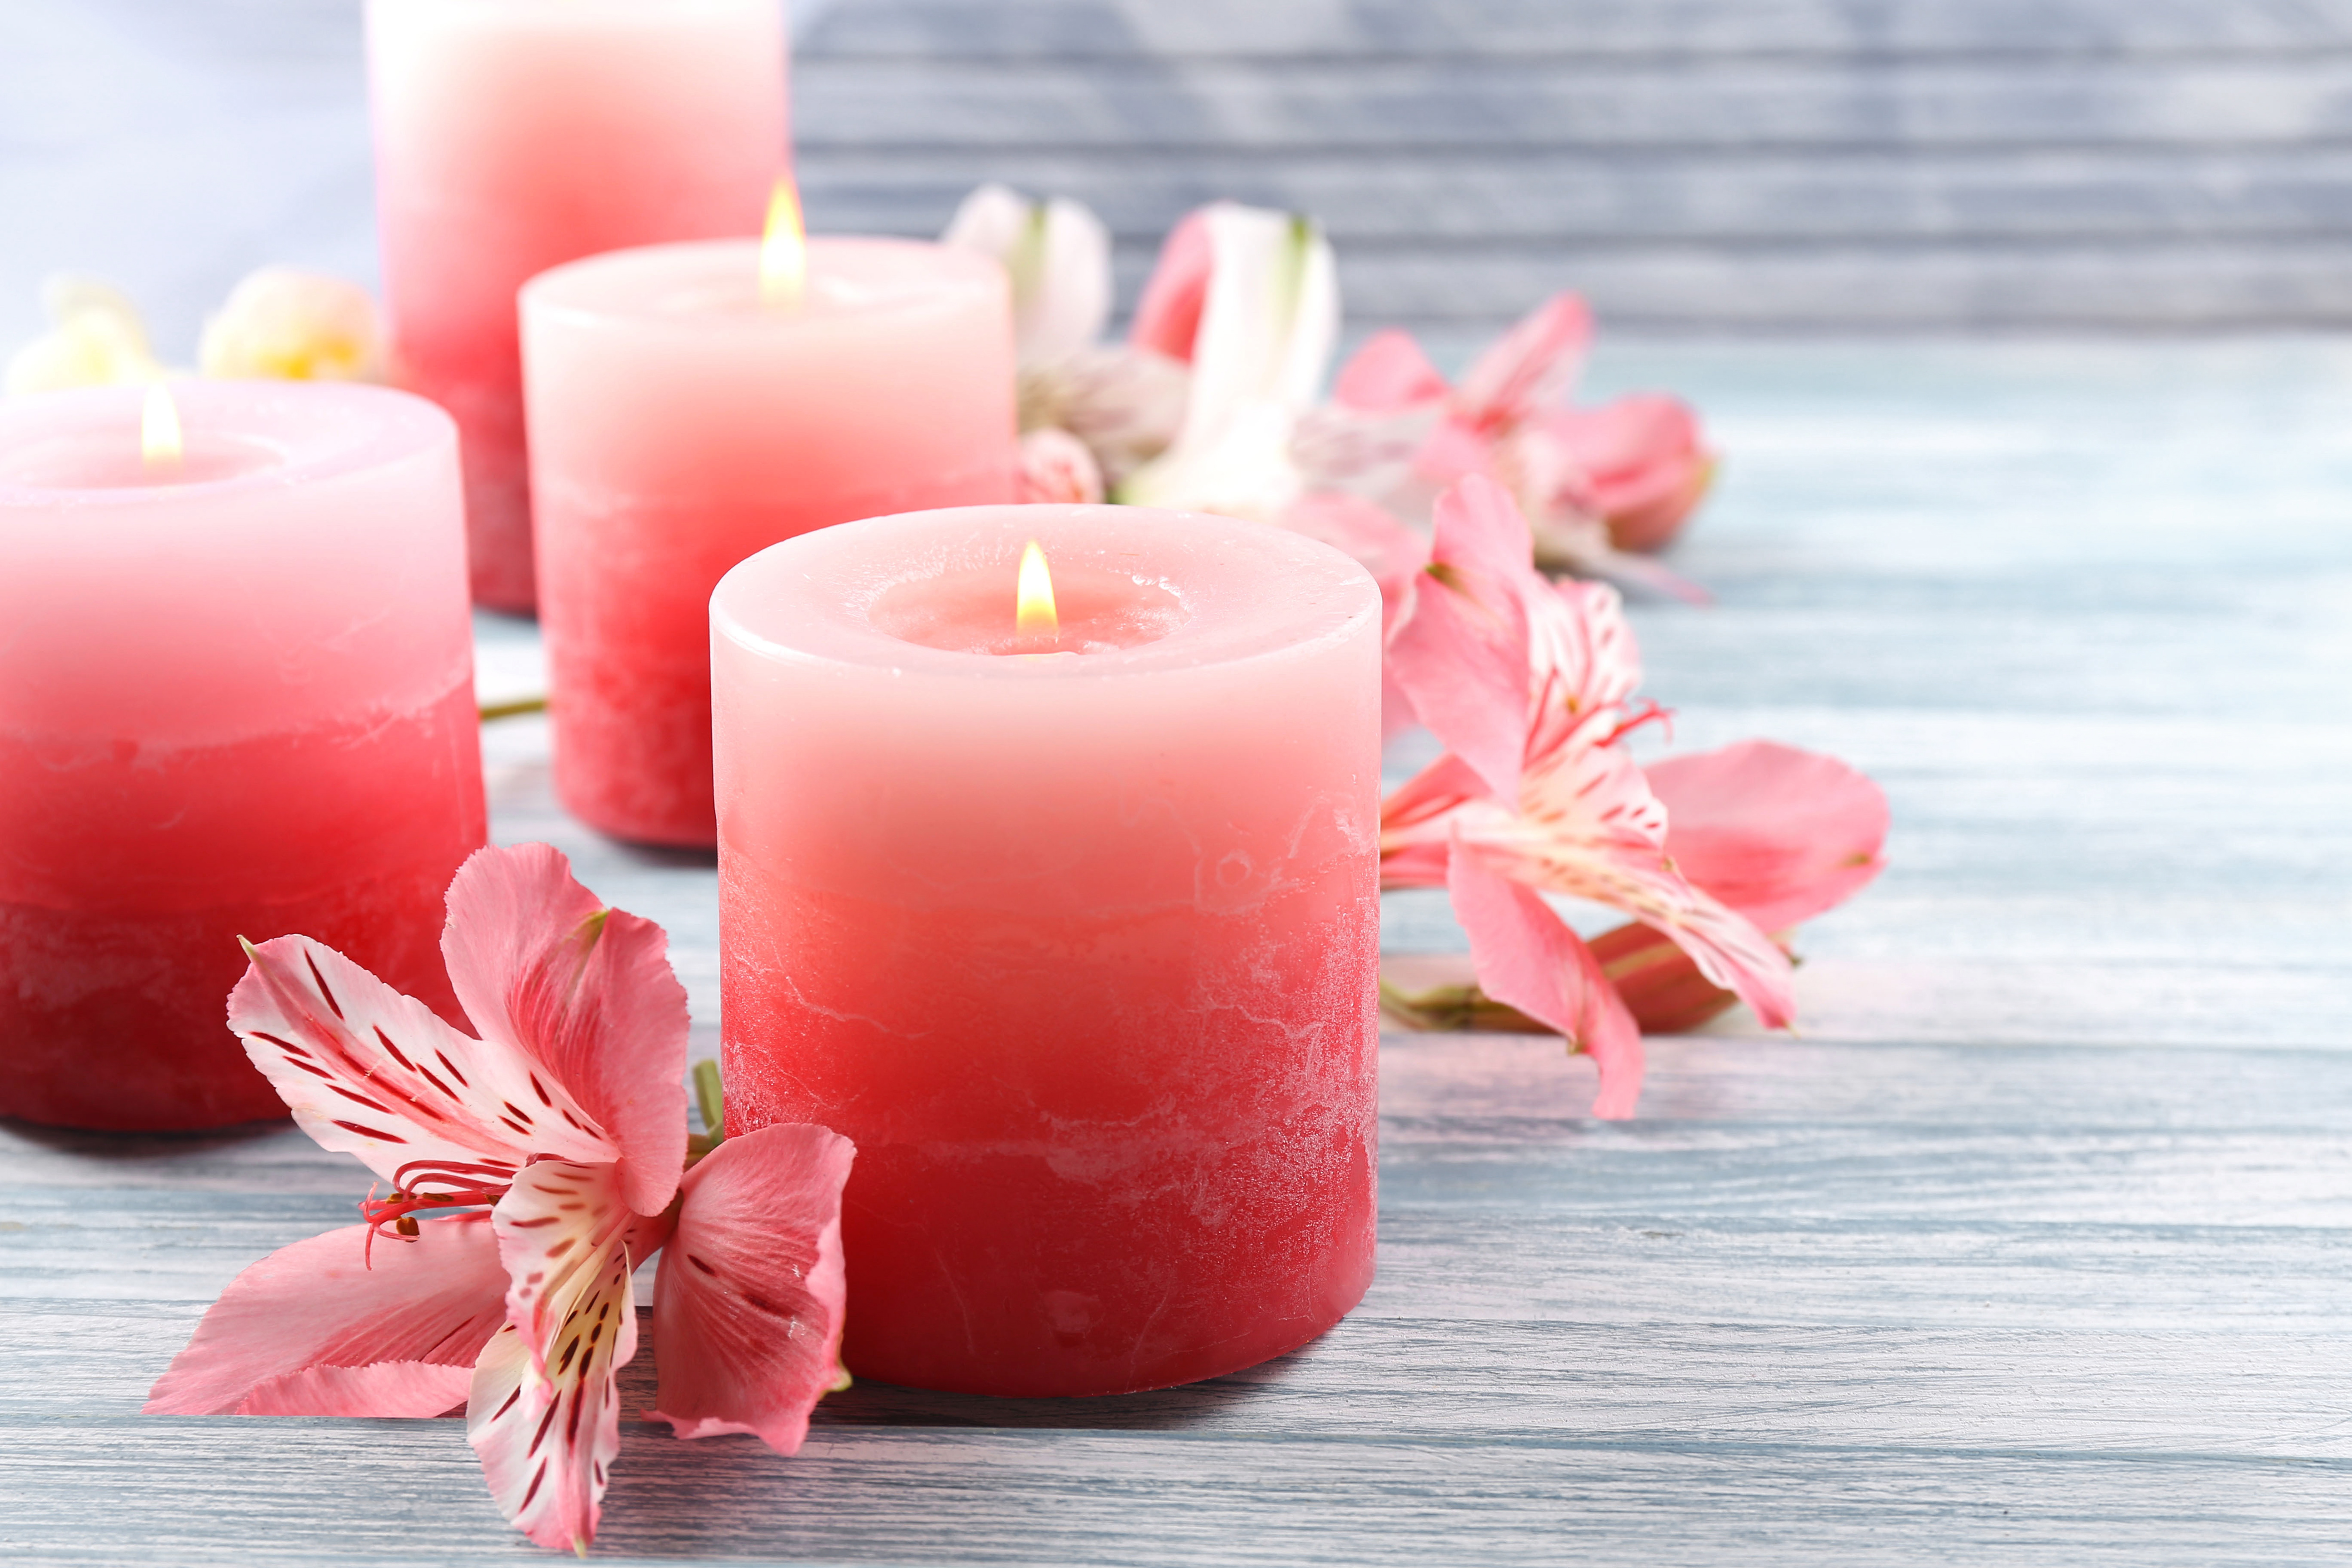 Cozy Candle Setting - Mobile Live Wallpaper - free download